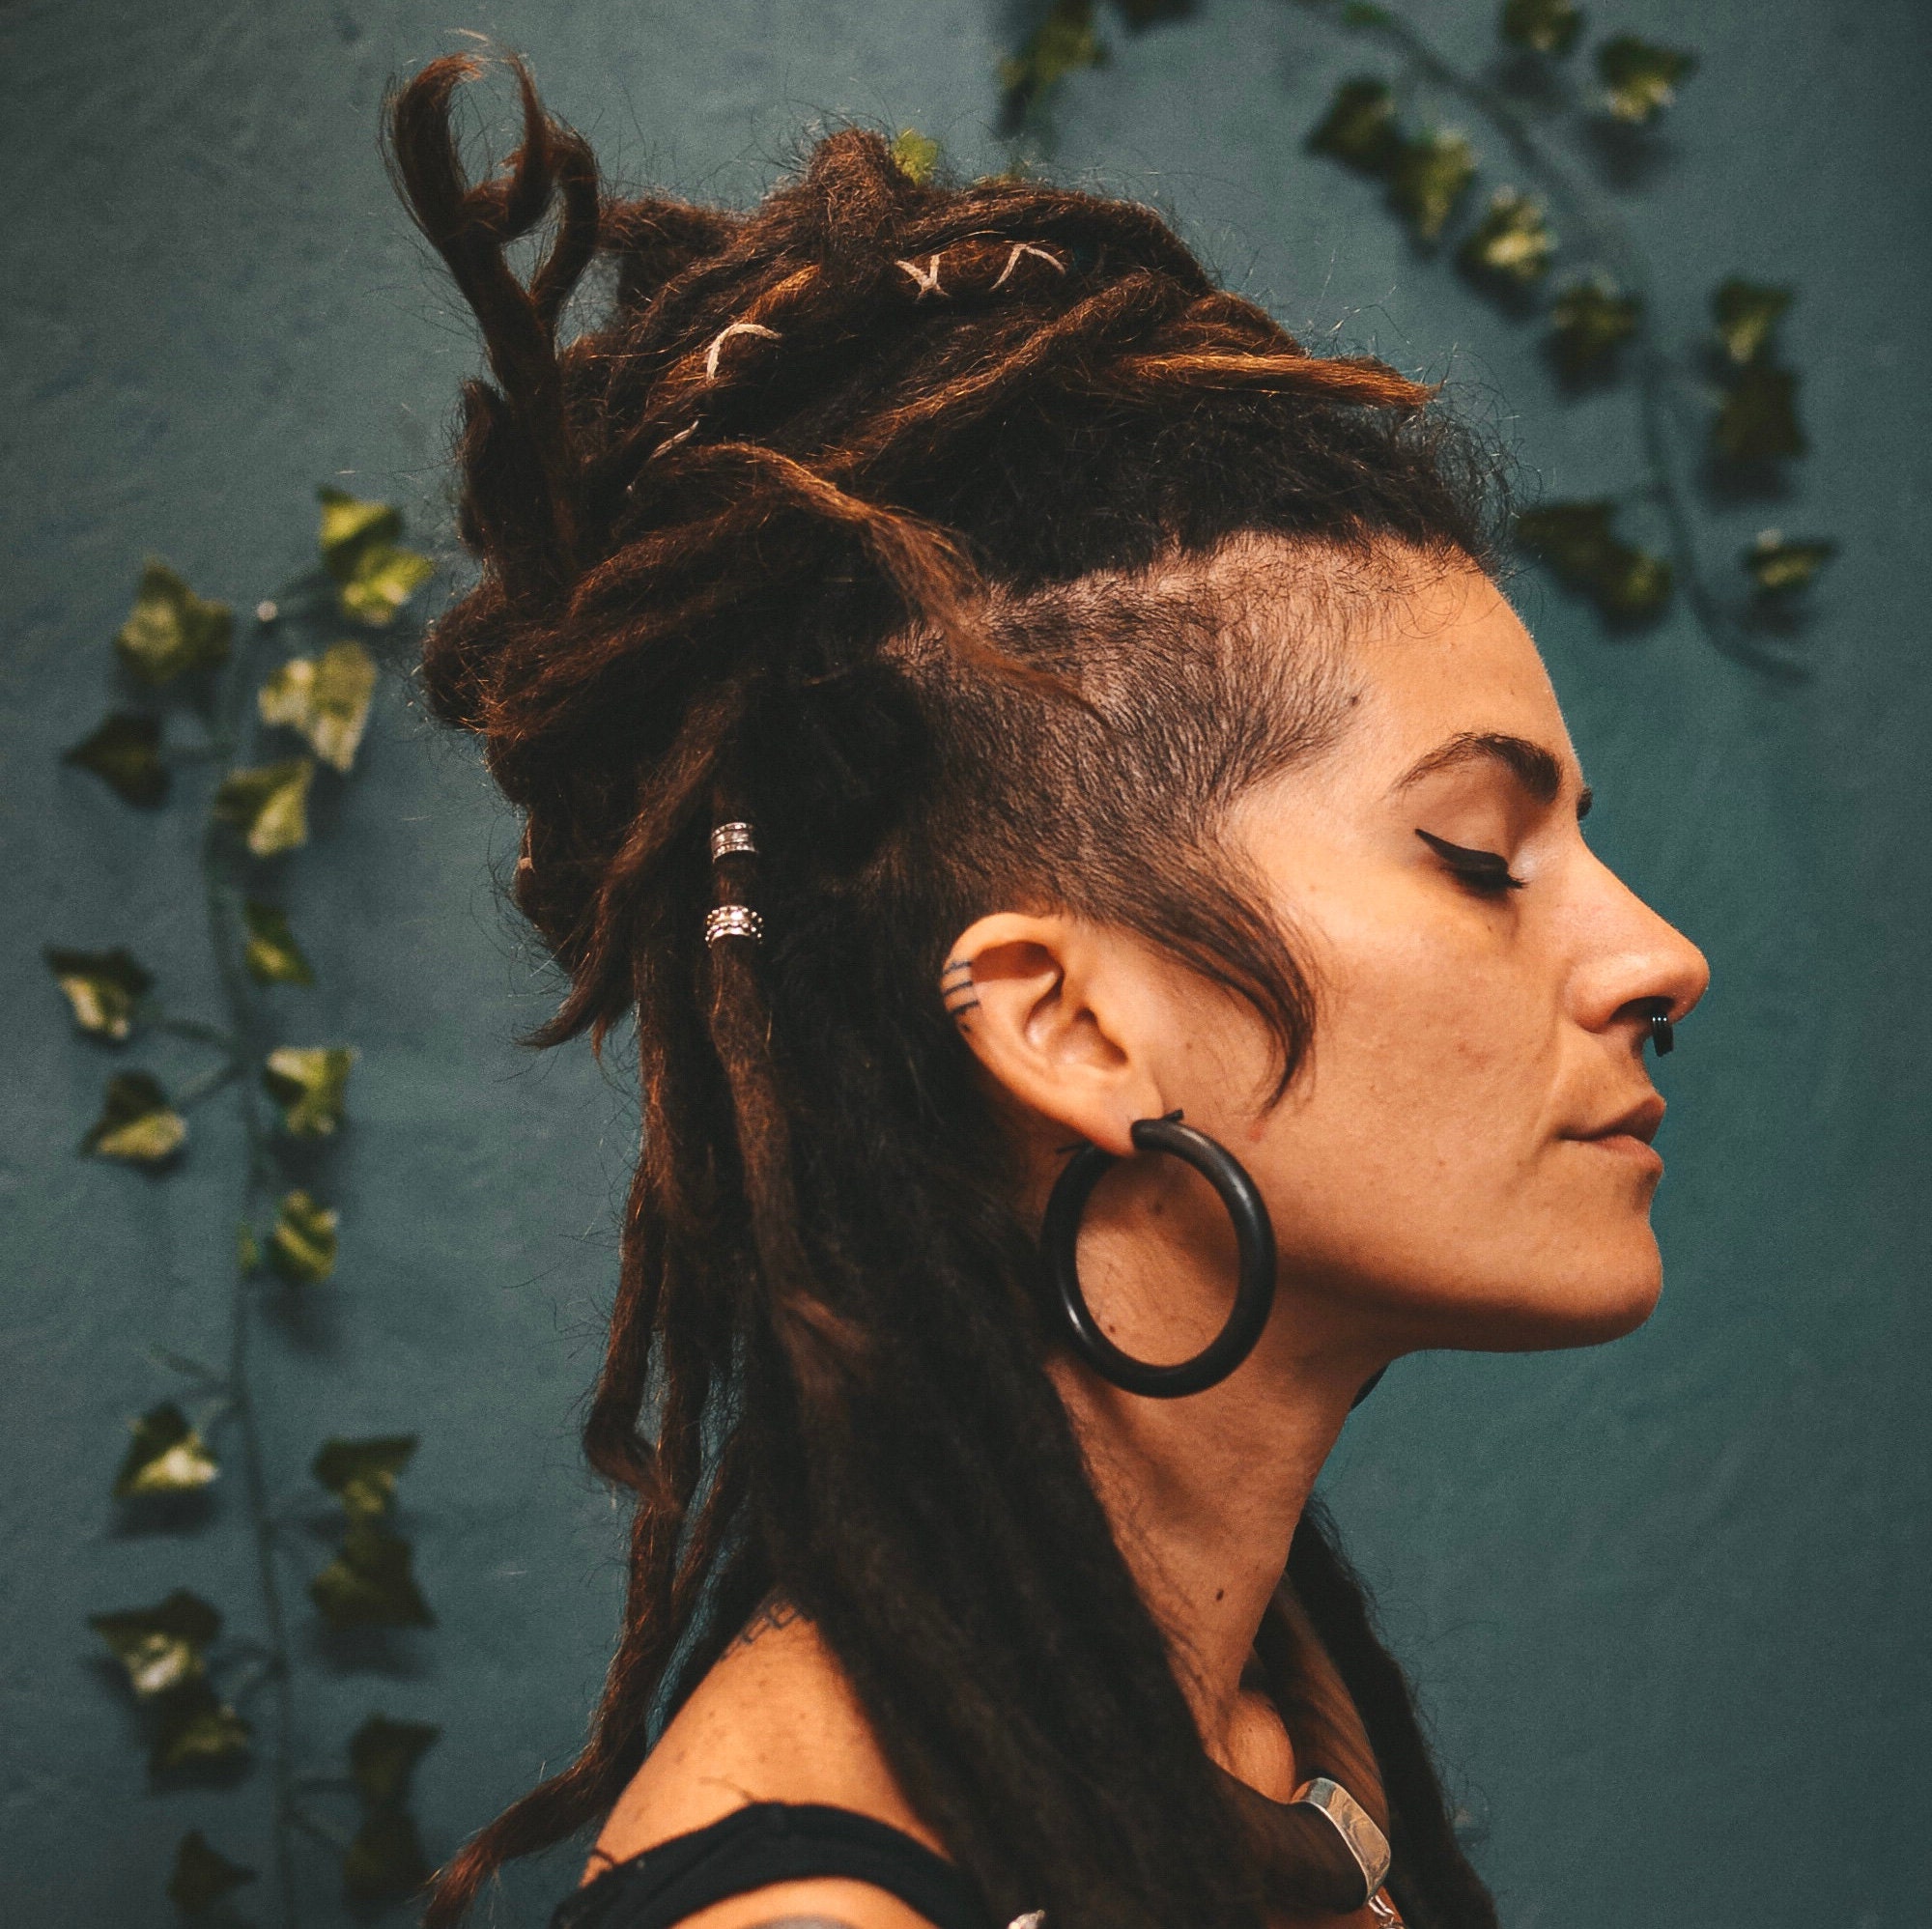 Hoop Earrings Wooden Tribal Style Eco Friendly on girl with dreadlocks and shaved sides - CrafterElena